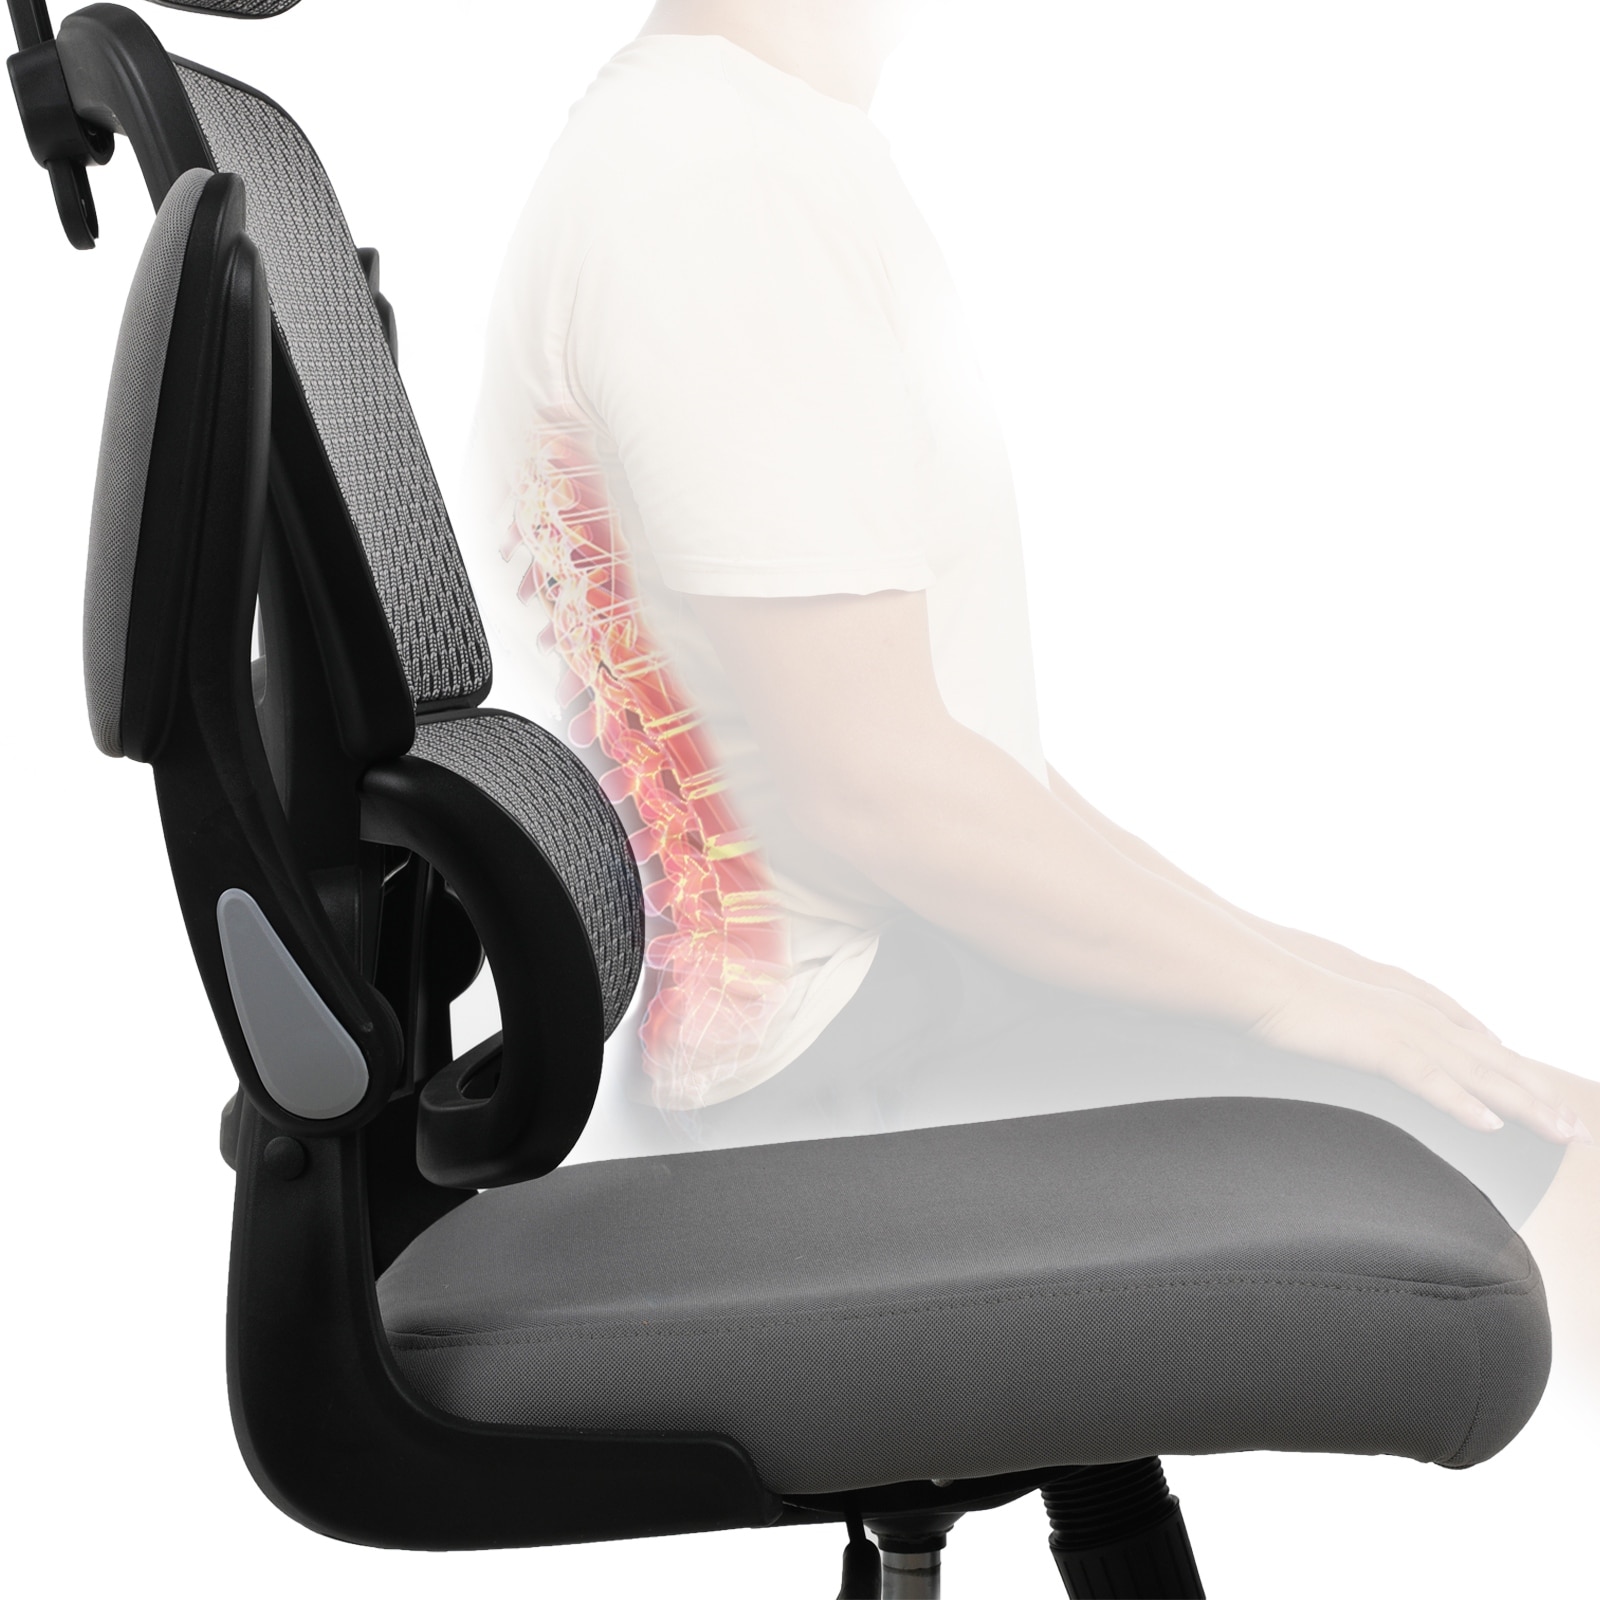 https://ak1.ostkcdn.com/images/products/is/images/direct/3237bb39886a8c15cb28cc77c3e6182fa7ff67f5/Mesh-Ergonomic-High-Back-Office-Chair-with-High-Adjustable-Headrest-with-Flip-Up-Arms%2CTilt-Function%2C-Lumbar-Support-Swivel-Chair.jpg